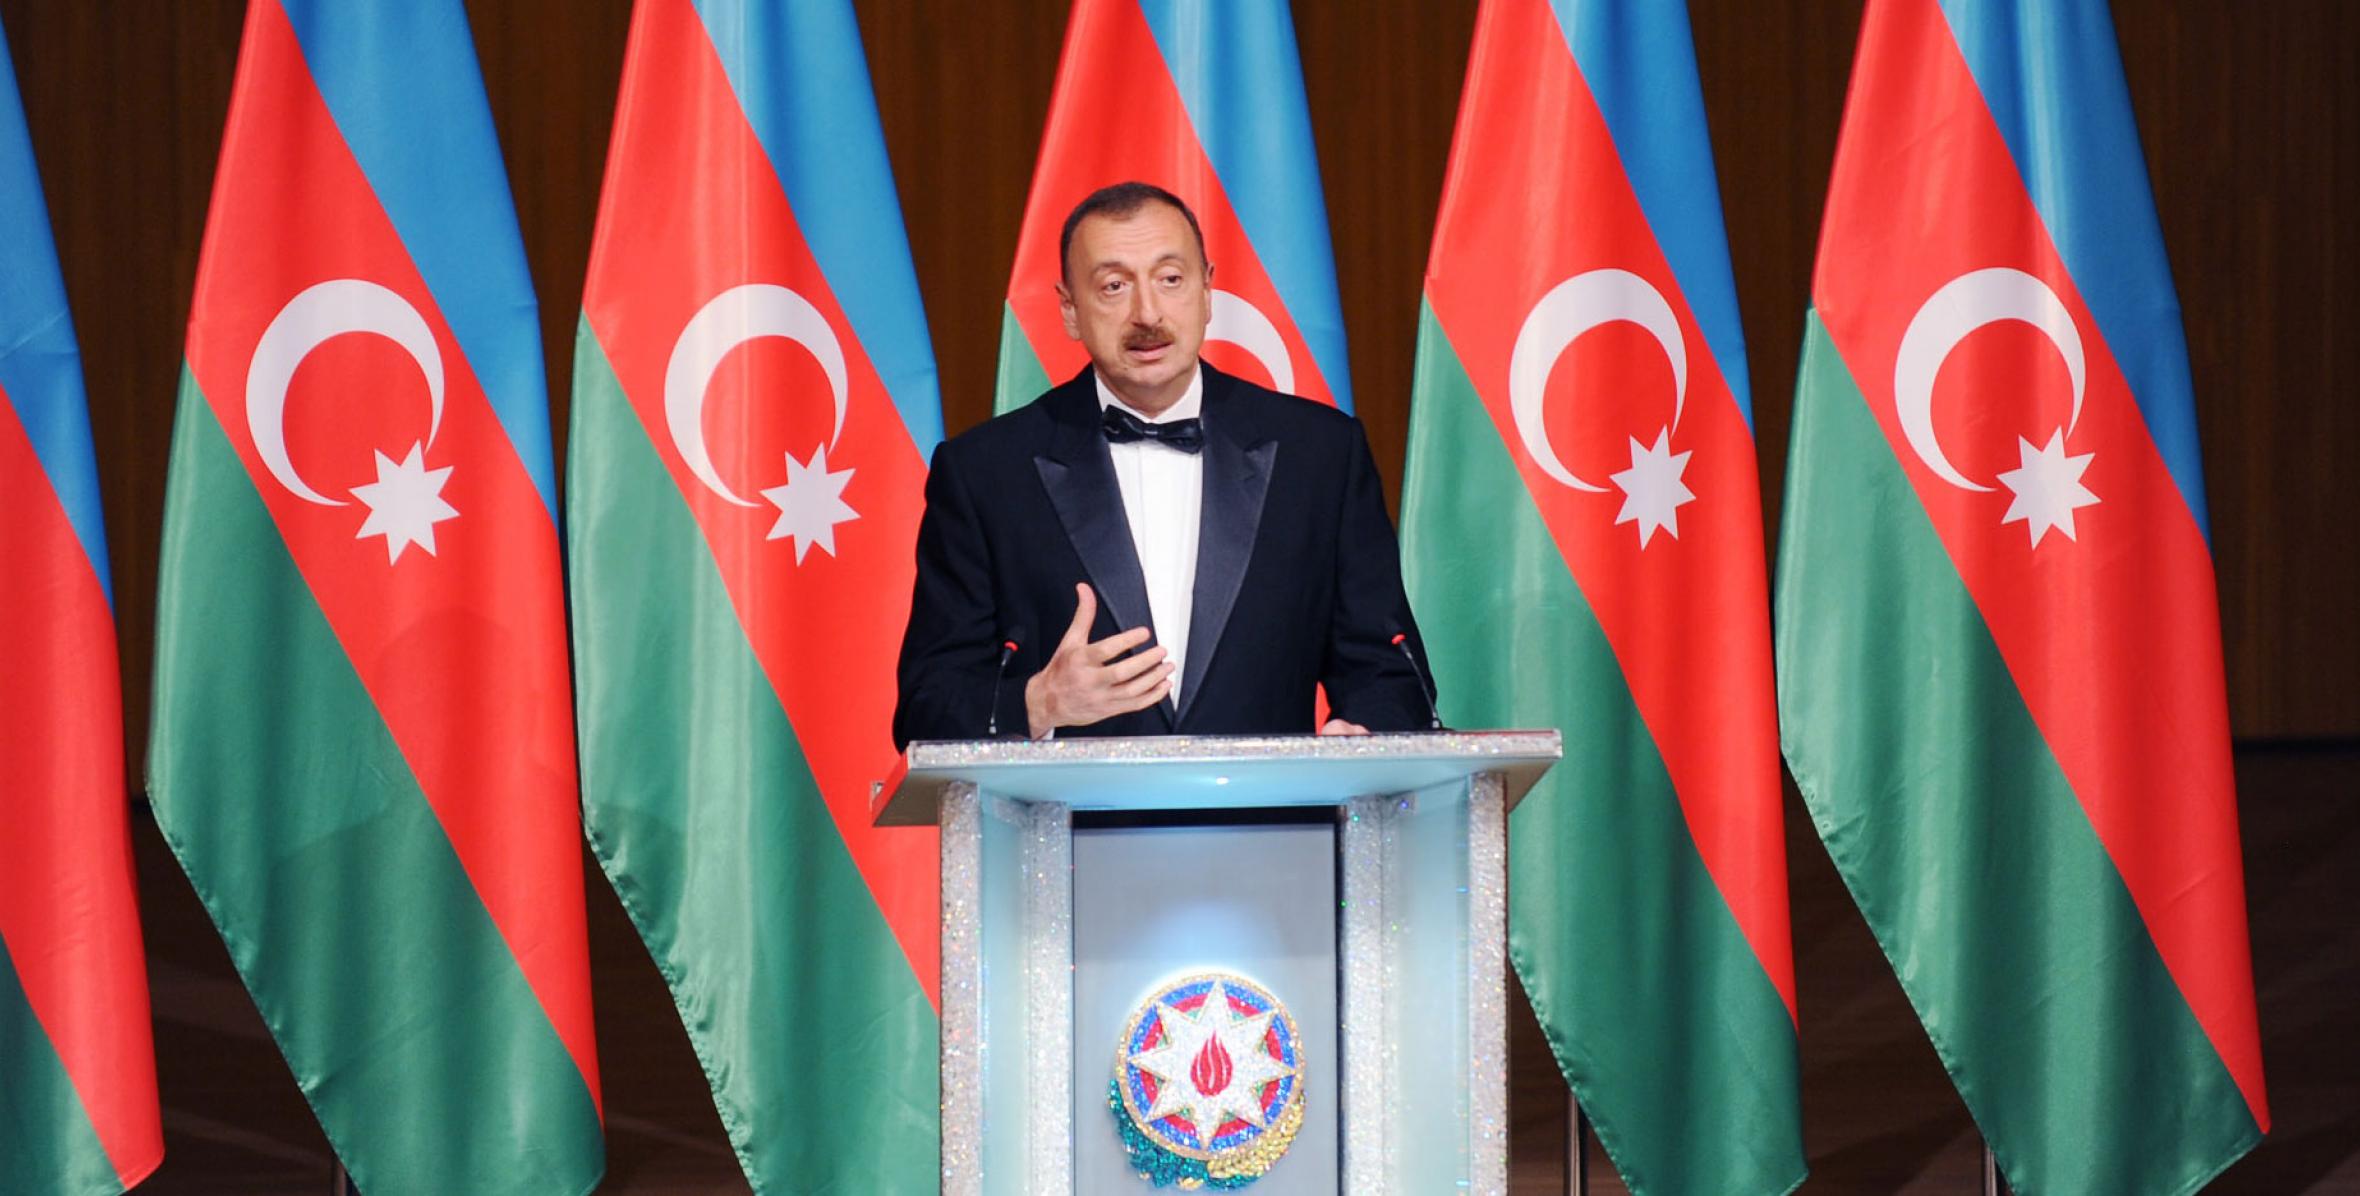 Speech by Ilham Aliyev at the ceremony to mark the 89th birthday anniversary of great leader Heydar Aliyev and the eighth anniversary of the Heydar Aliyev Foundation